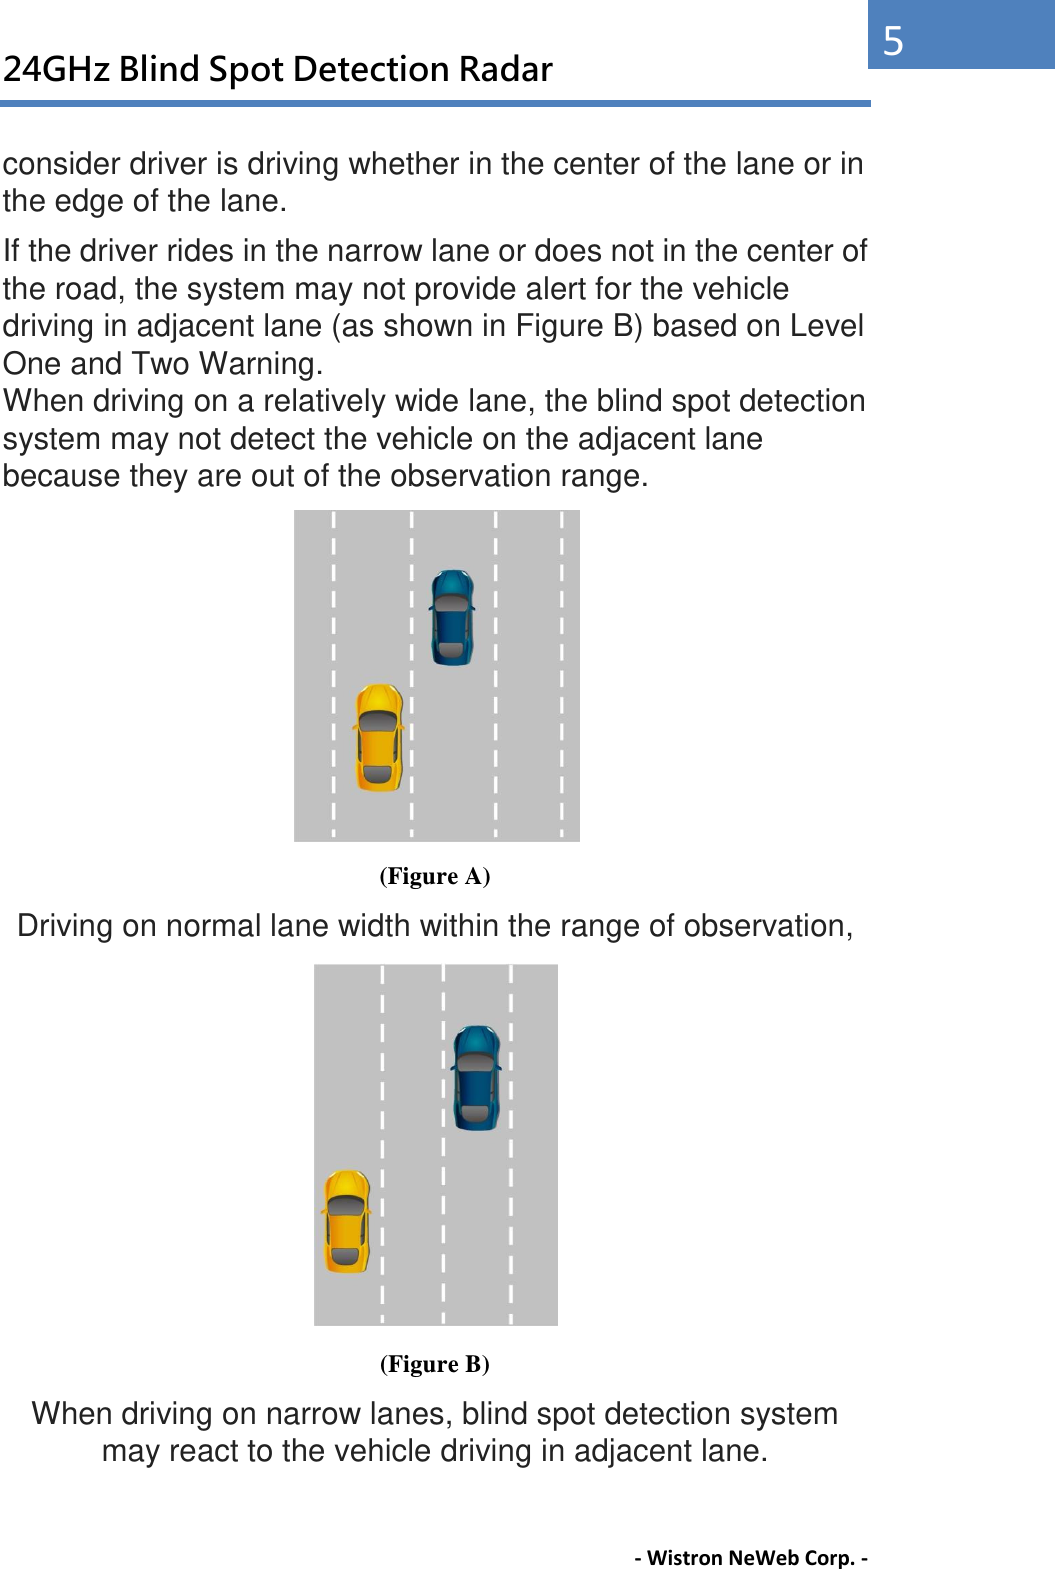 24GHz Blind Spot Detection Radar - Wistron NeWeb Corp. - 5 consider driver is driving whether in the center of the lane or in the edge of the lane. If the driver rides in the narrow lane or does not in the center of the road, the system may not provide alert for the vehicle driving in adjacent lane (as shown in Figure B) based on Level One and Two Warning. When driving on a relatively wide lane, the blind spot detection system may not detect the vehicle on the adjacent lane because they are out of the observation range.    (Figure A) Driving on normal lane width within the range of observation,  (Figure B) When driving on narrow lanes, blind spot detection system may react to the vehicle driving in adjacent lane. 